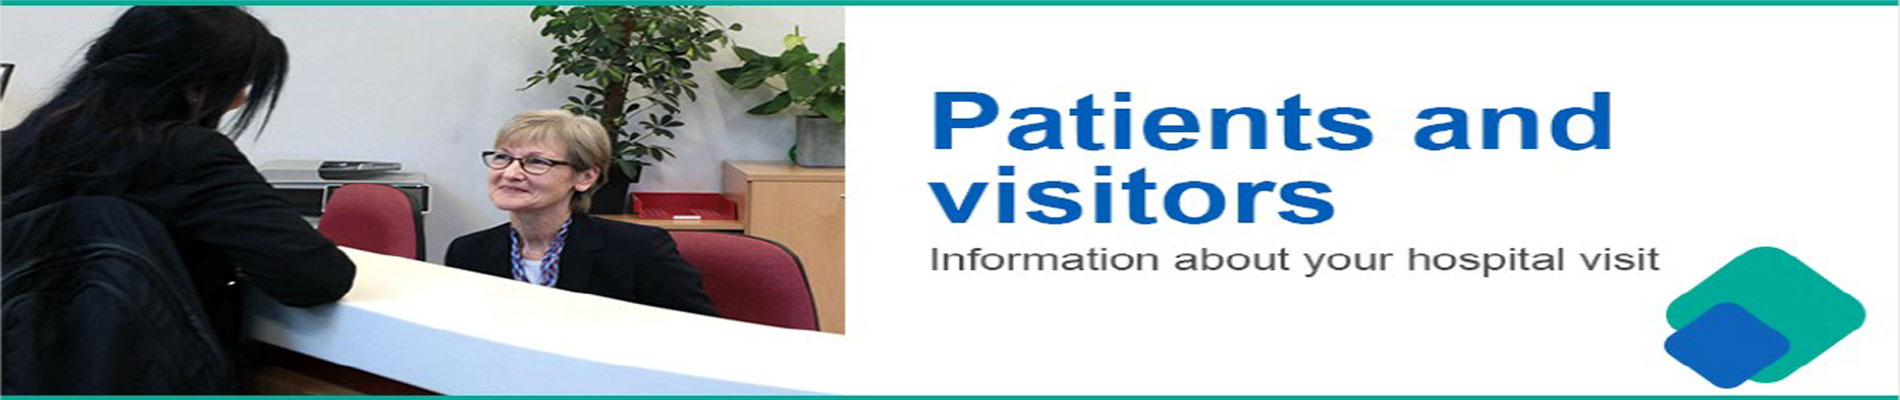 Banner picture of Hospital staff sitting at desk greeting woman. Banner says:

Patients and Visitors
Information about your hospital visit